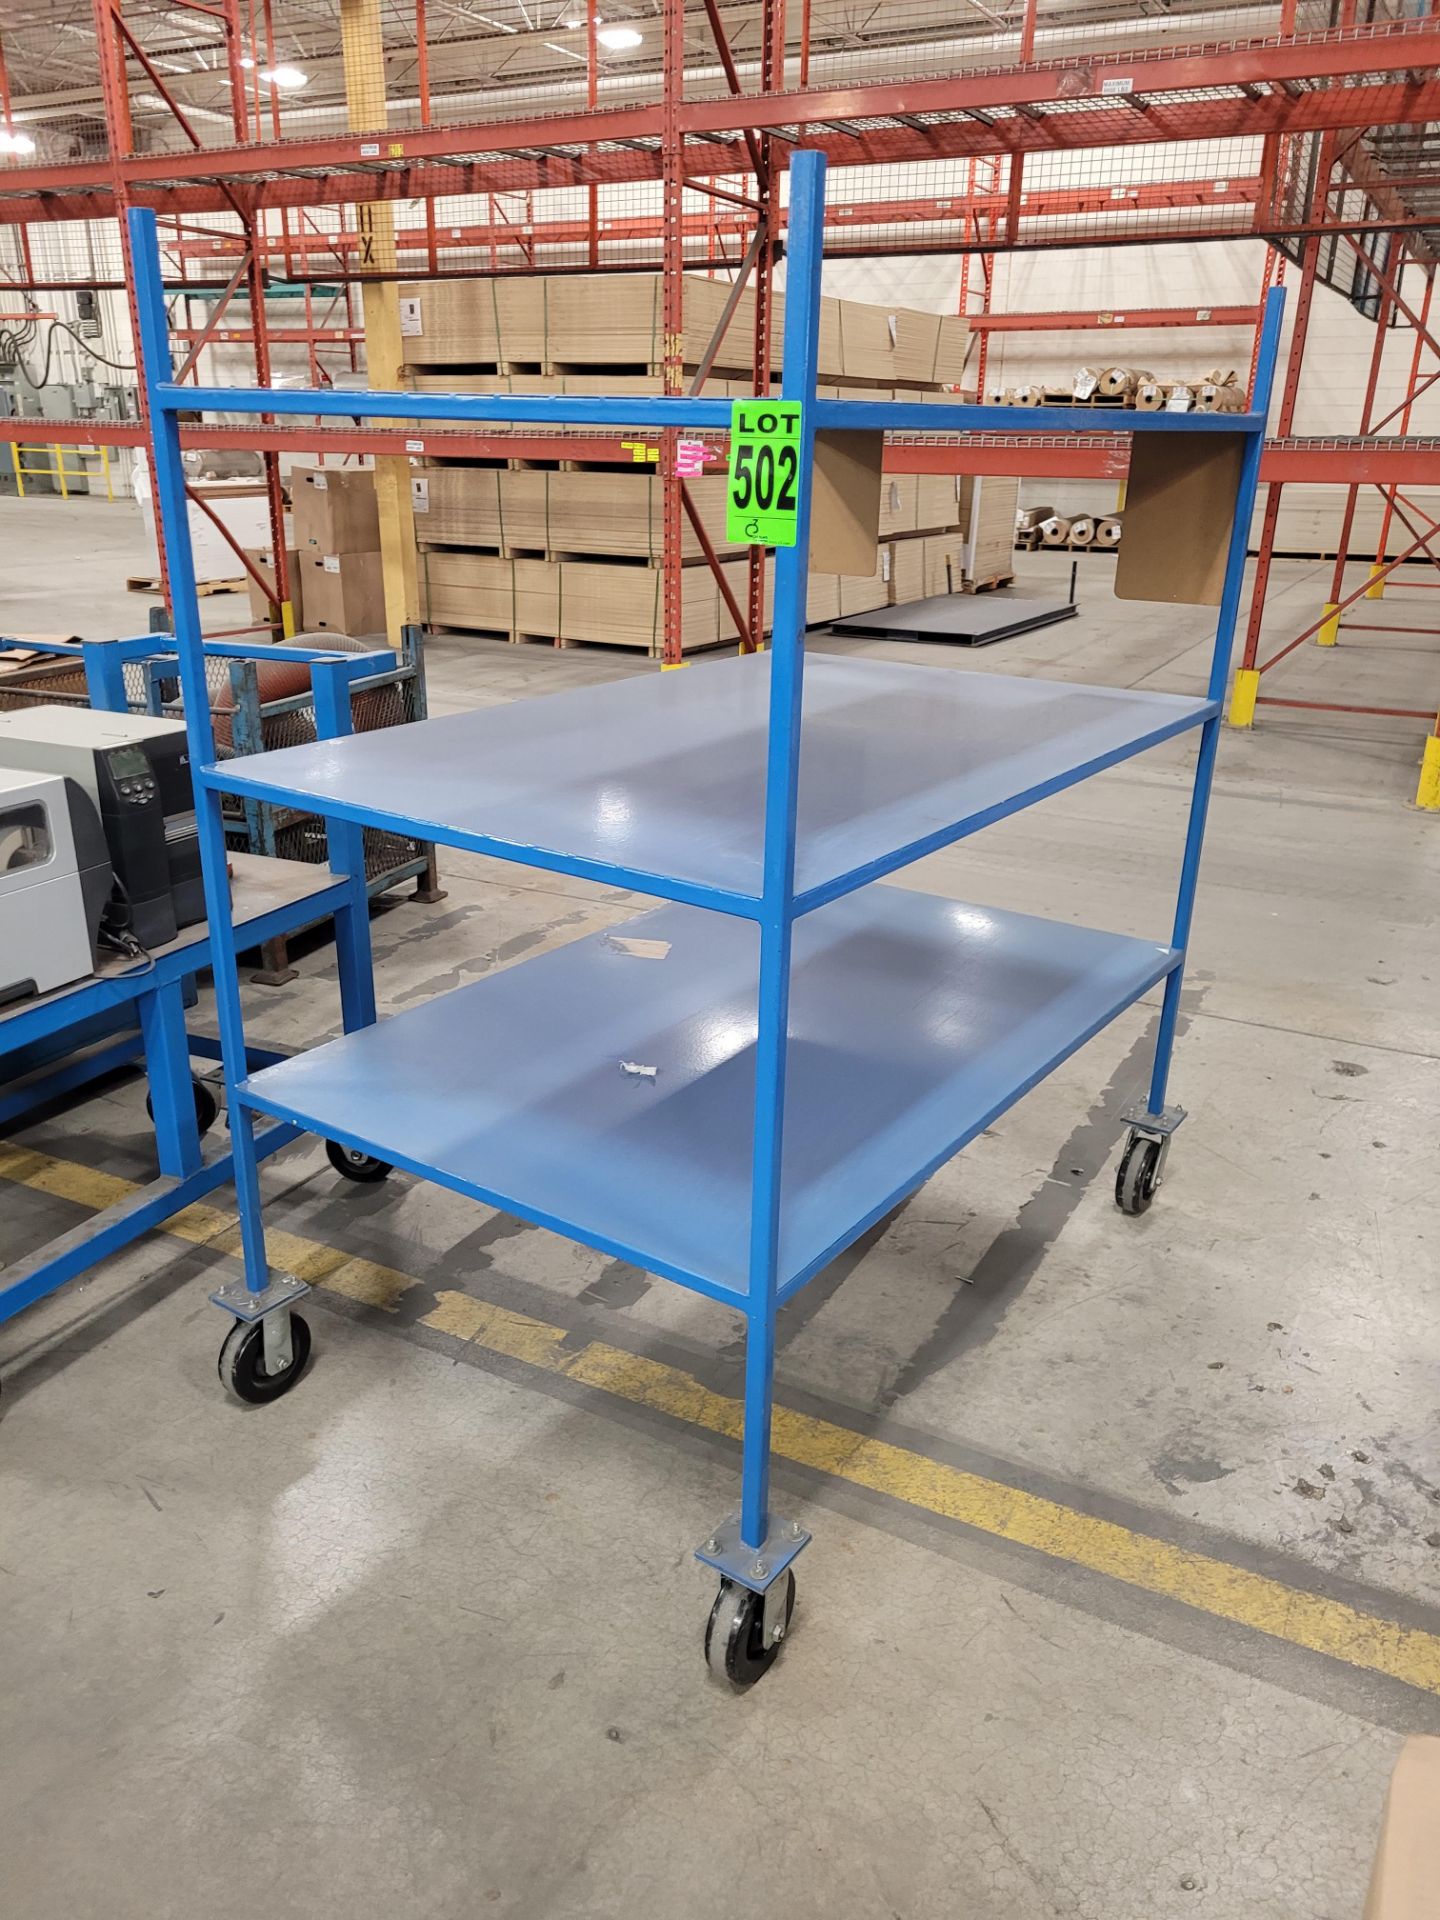 3-level mobile steel shelving unit on casters, 3'' x 5' x 5' w/handles